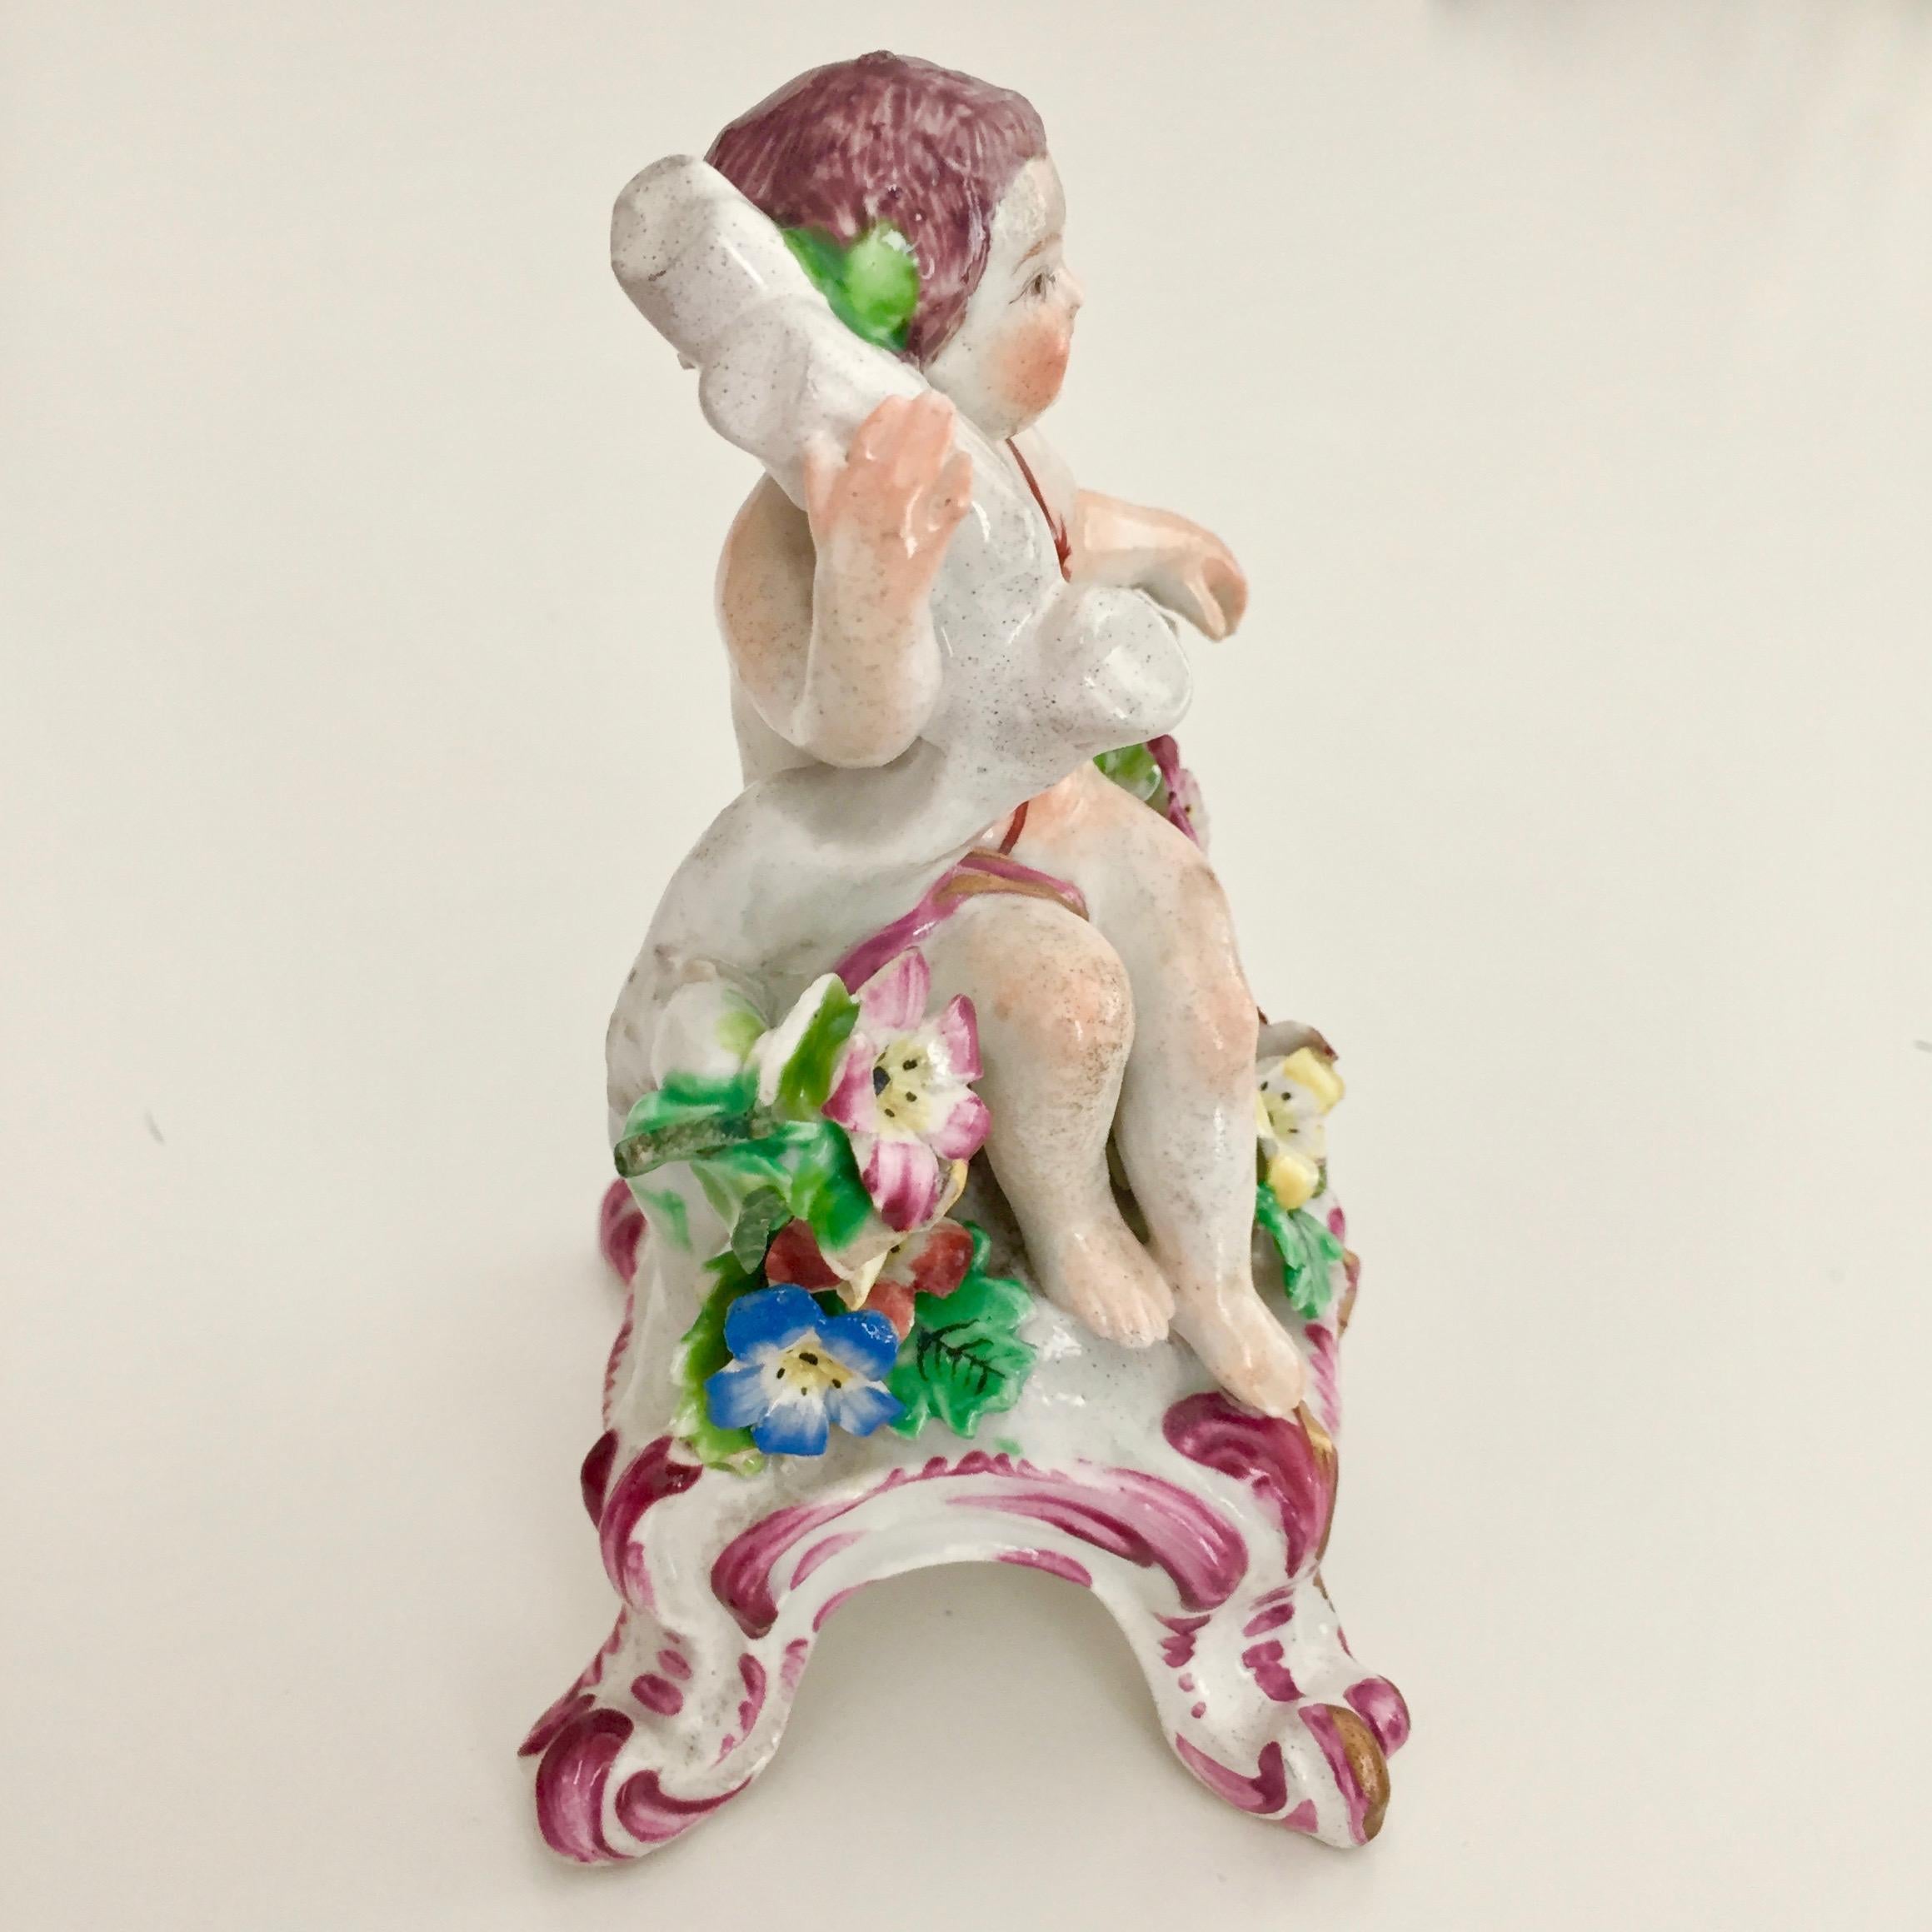 This is a wonderful little figure of a boy or putto made by the Bow Porcelain factory in about 1760.

The Bow Porcelain Factory was one of the first potteries in Britain to make soft paste porcelain, and most probably the very first to use bone ash,